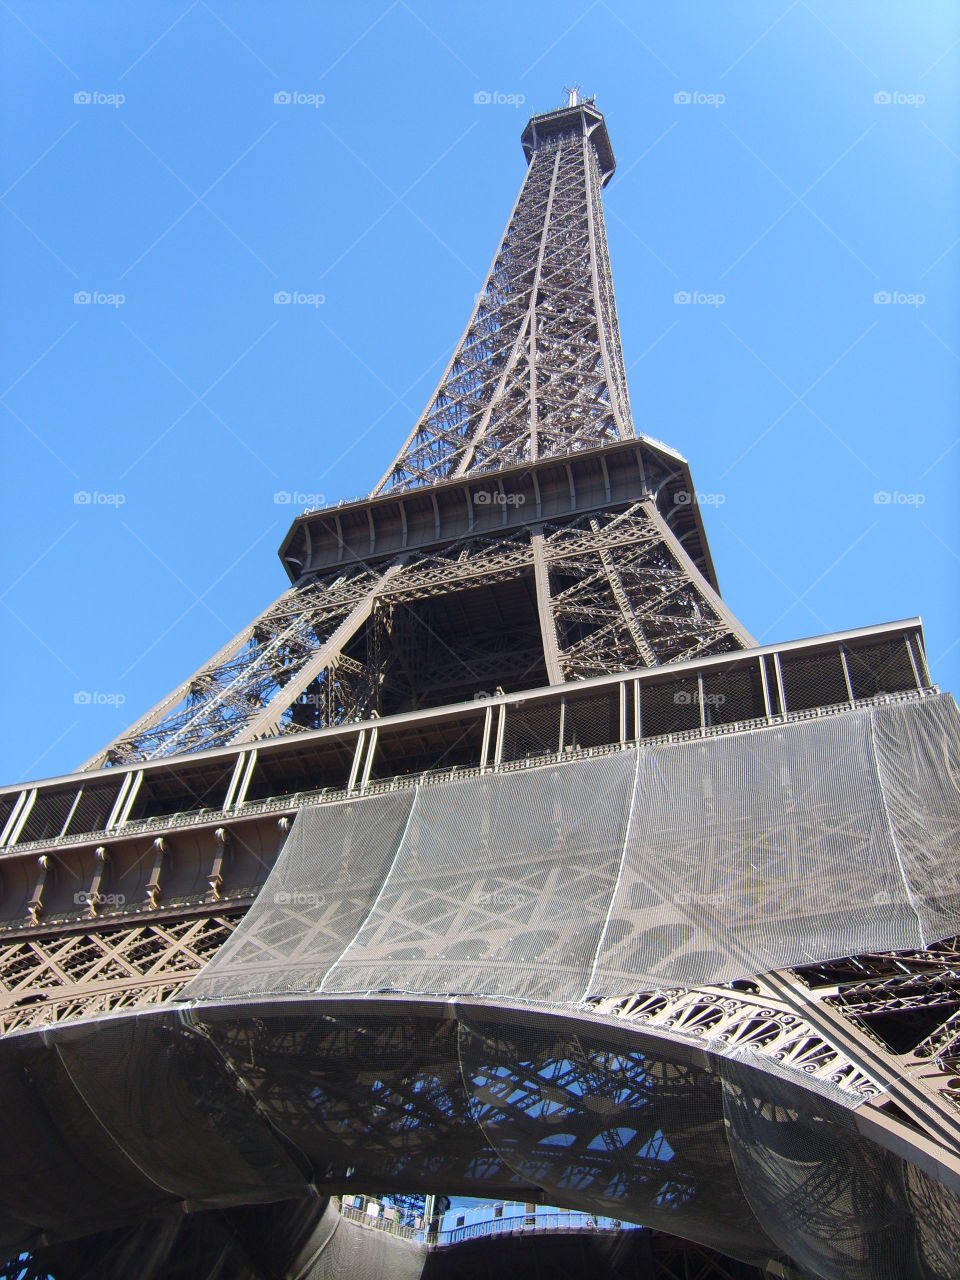 Low angle view of Eiffel Tower, Paris